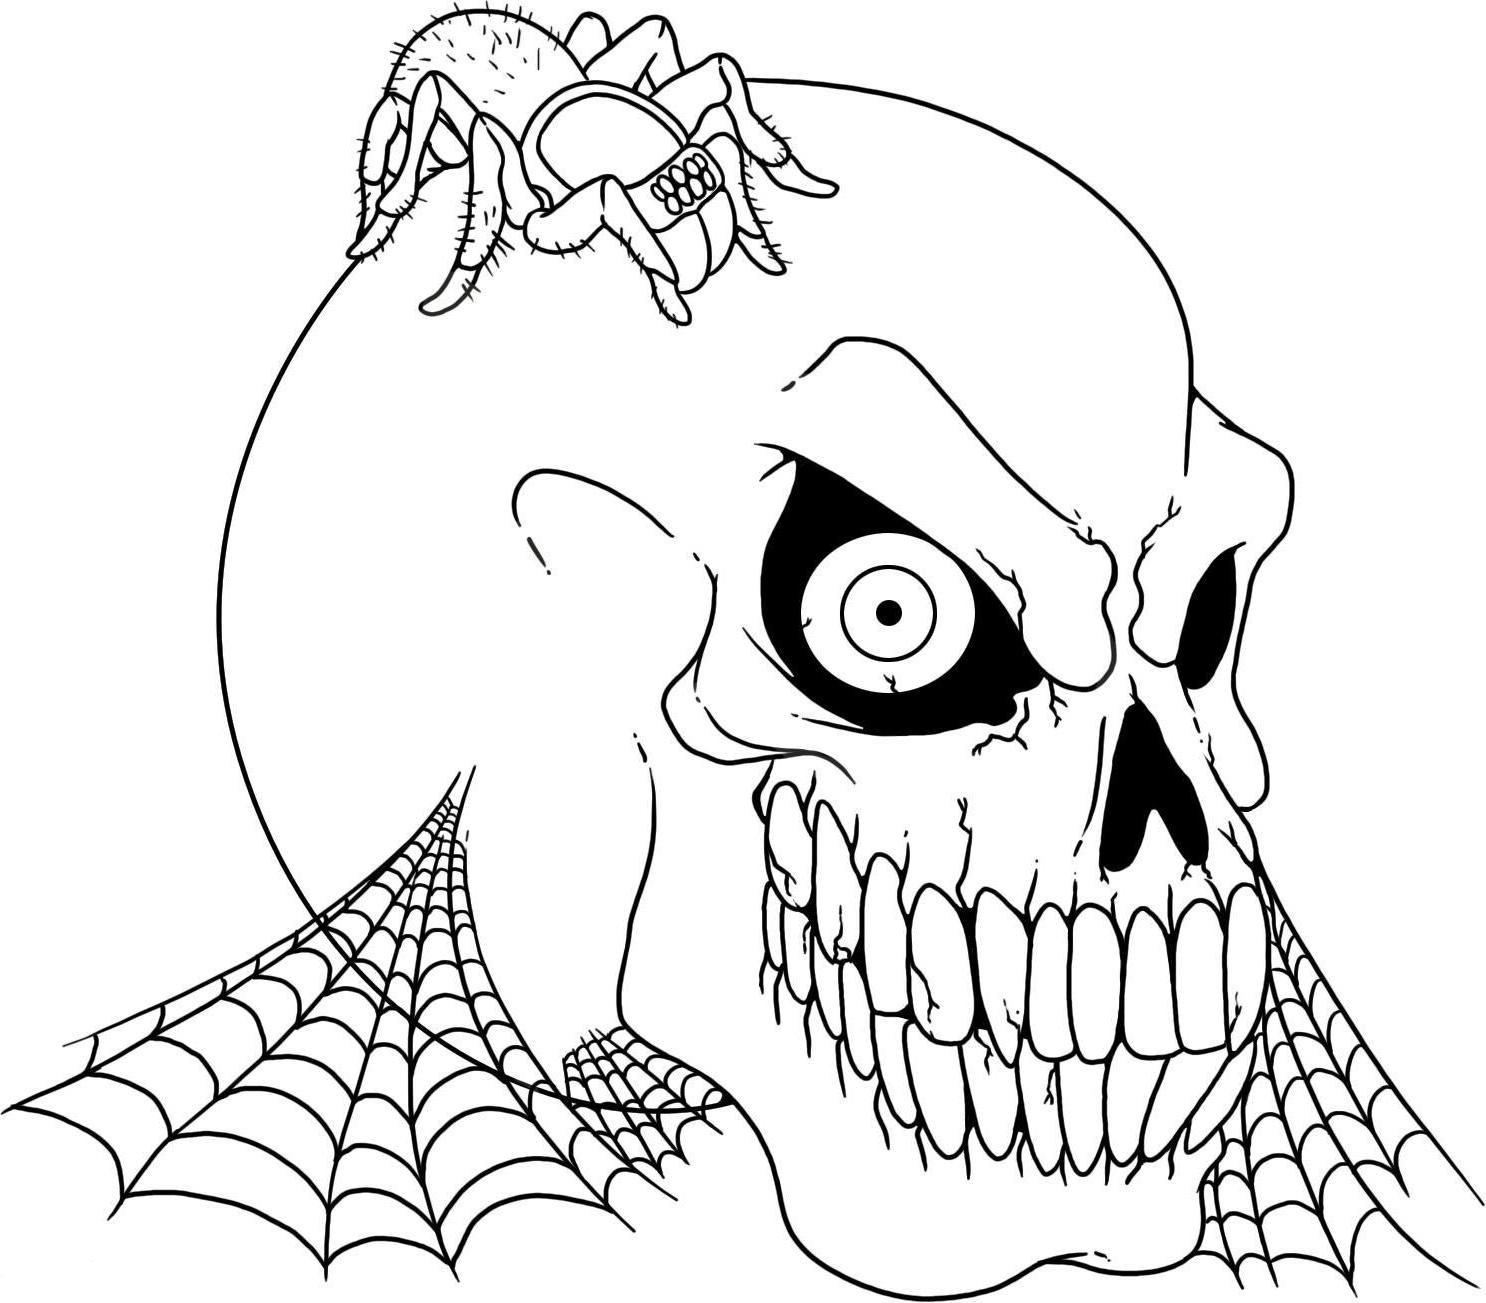 Print Scary Halloween Skull And Spider Coloring Pages or Download ...